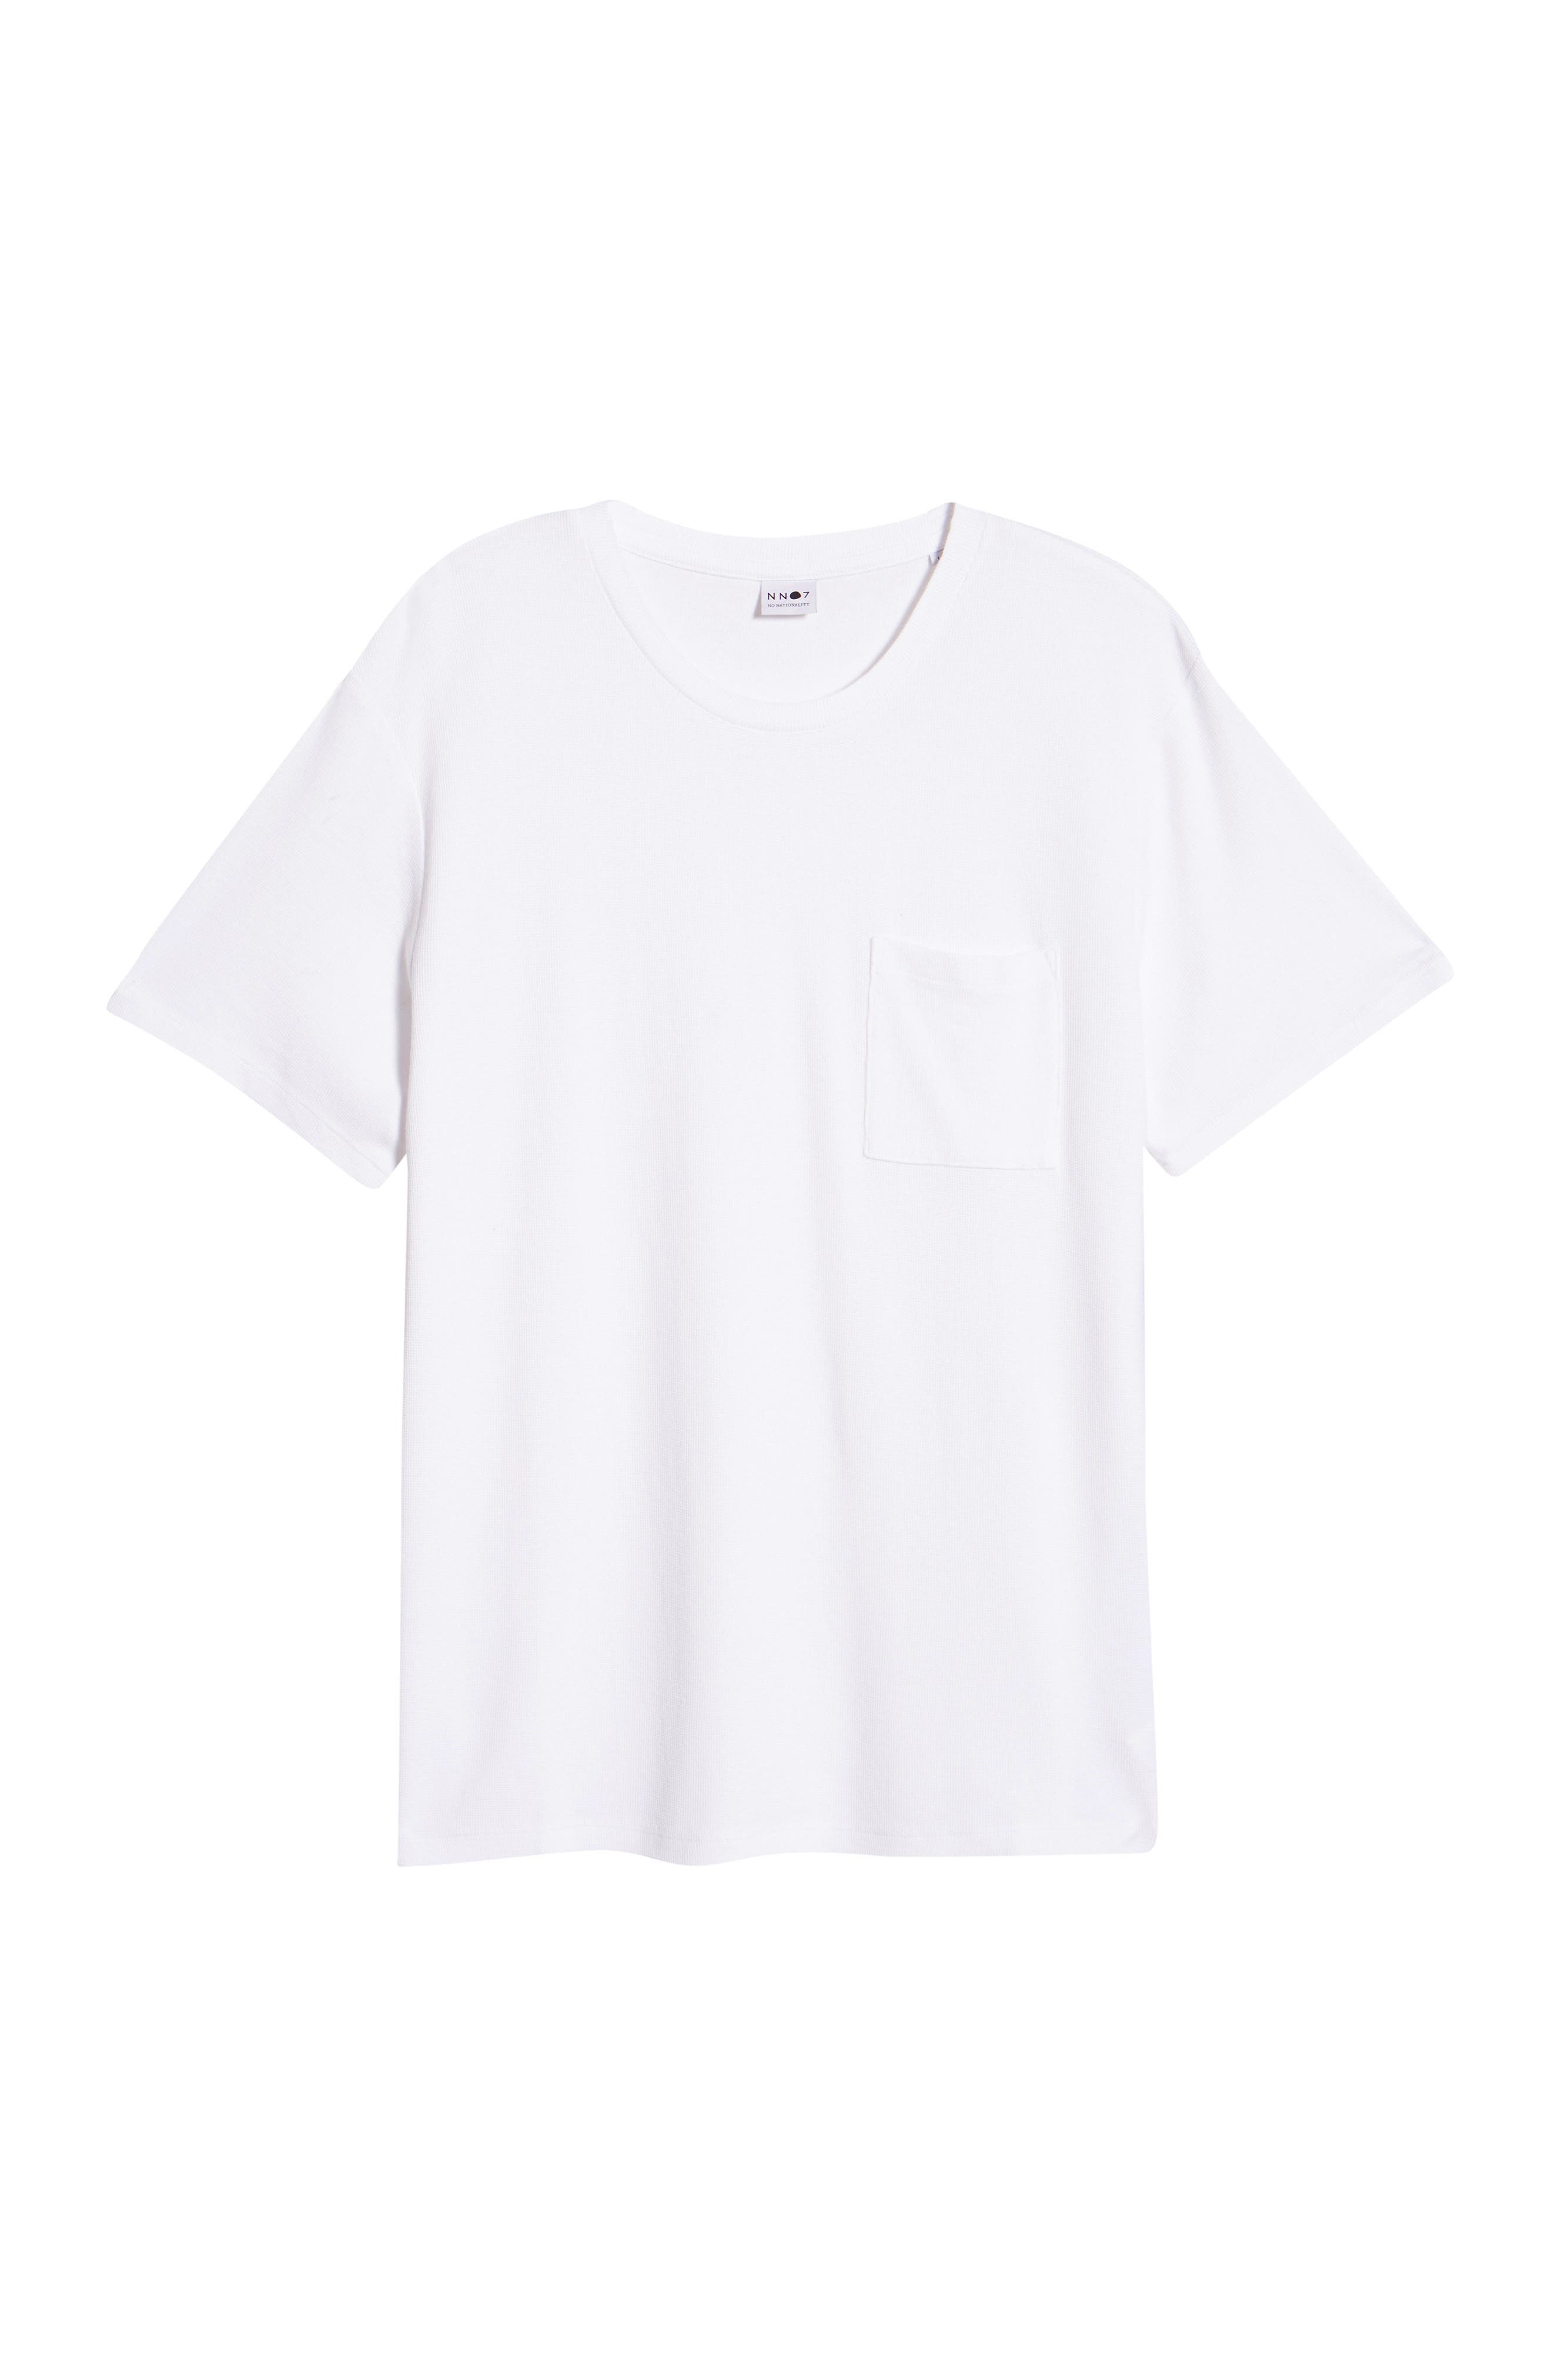 NN07 Men's Clive 3323 Slim Fit T-Shirt in 001 White